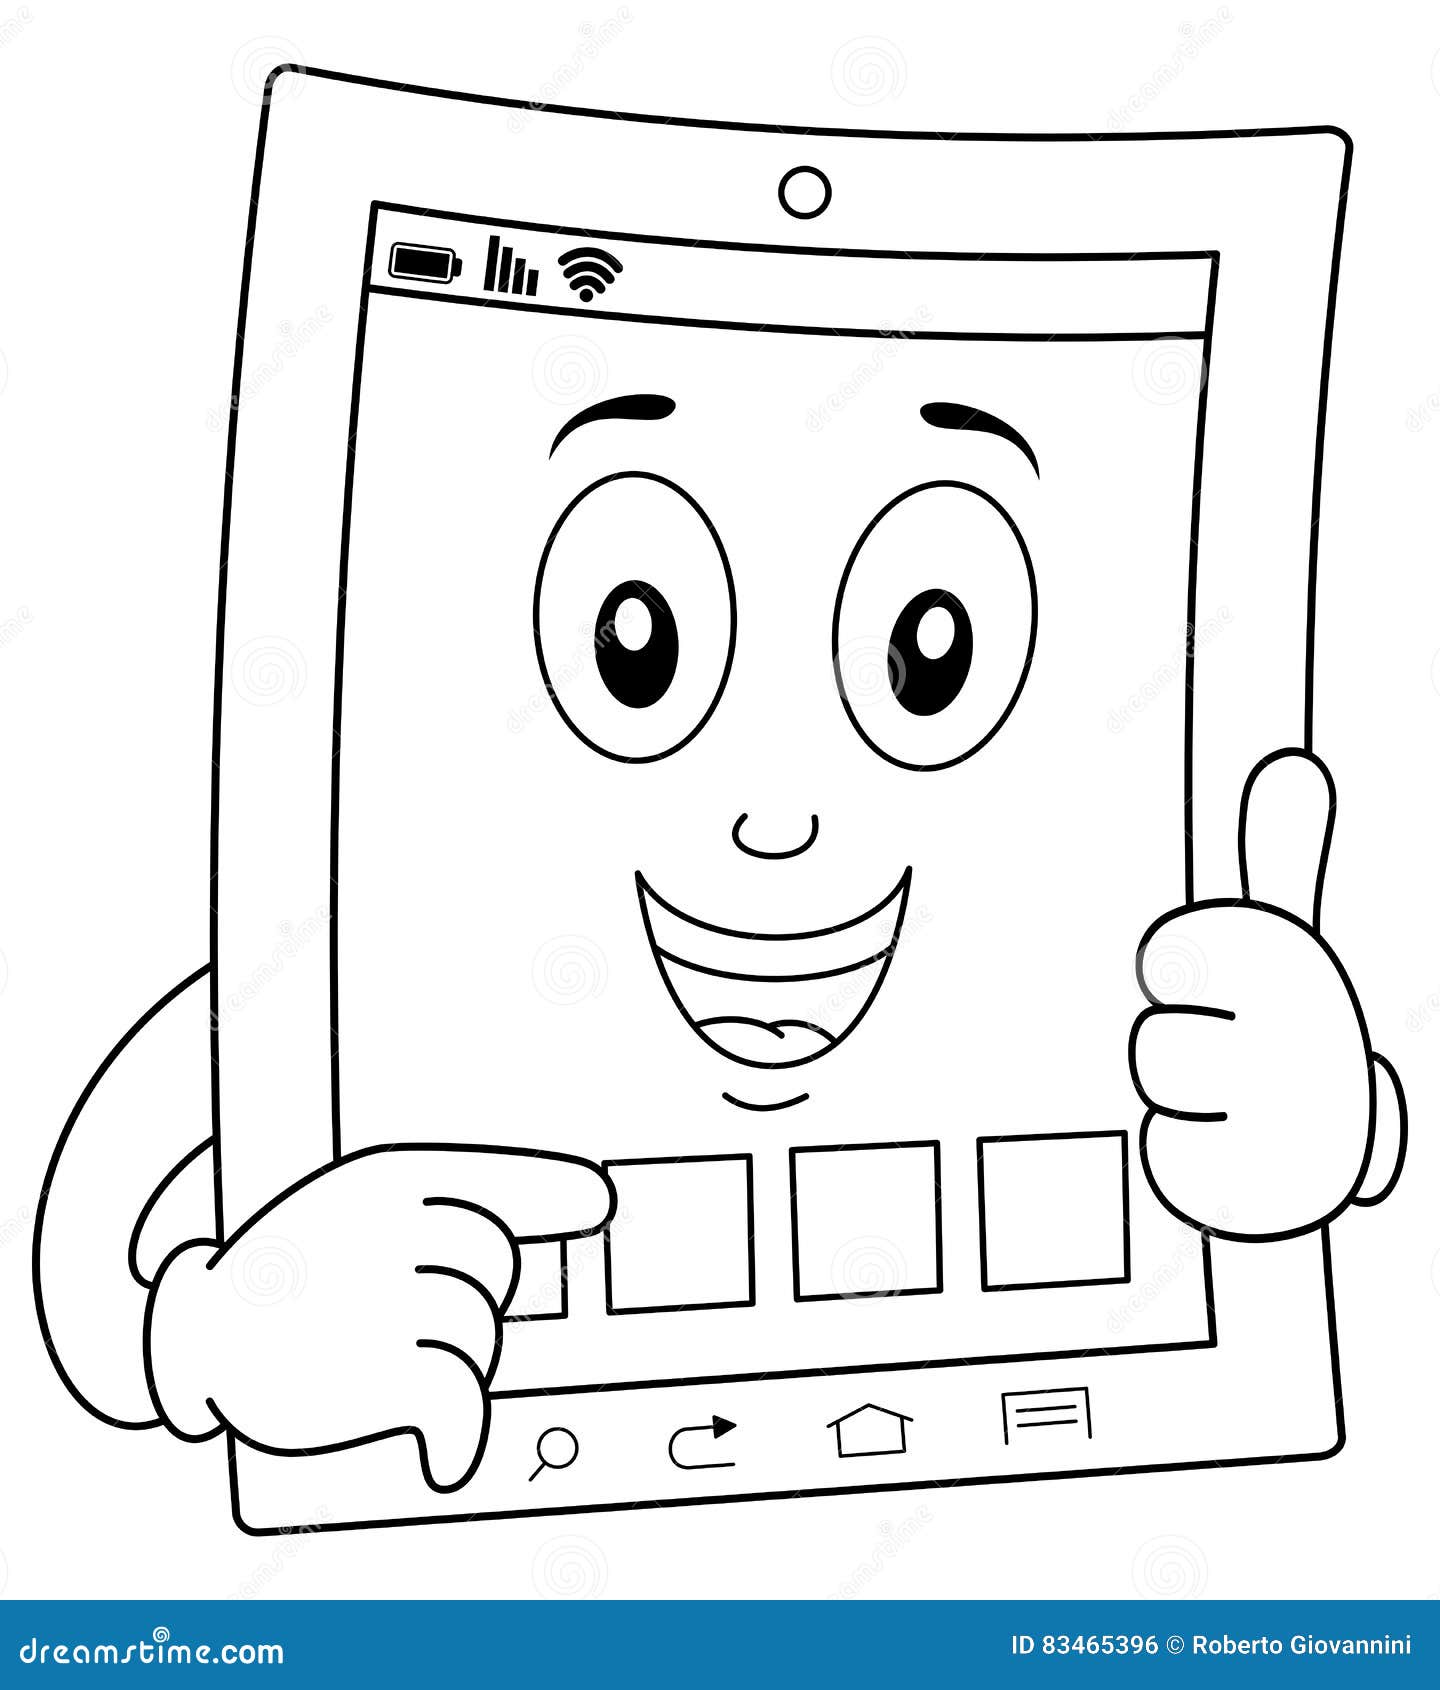 Tablet Printable Coloring Pages Coloring Pages